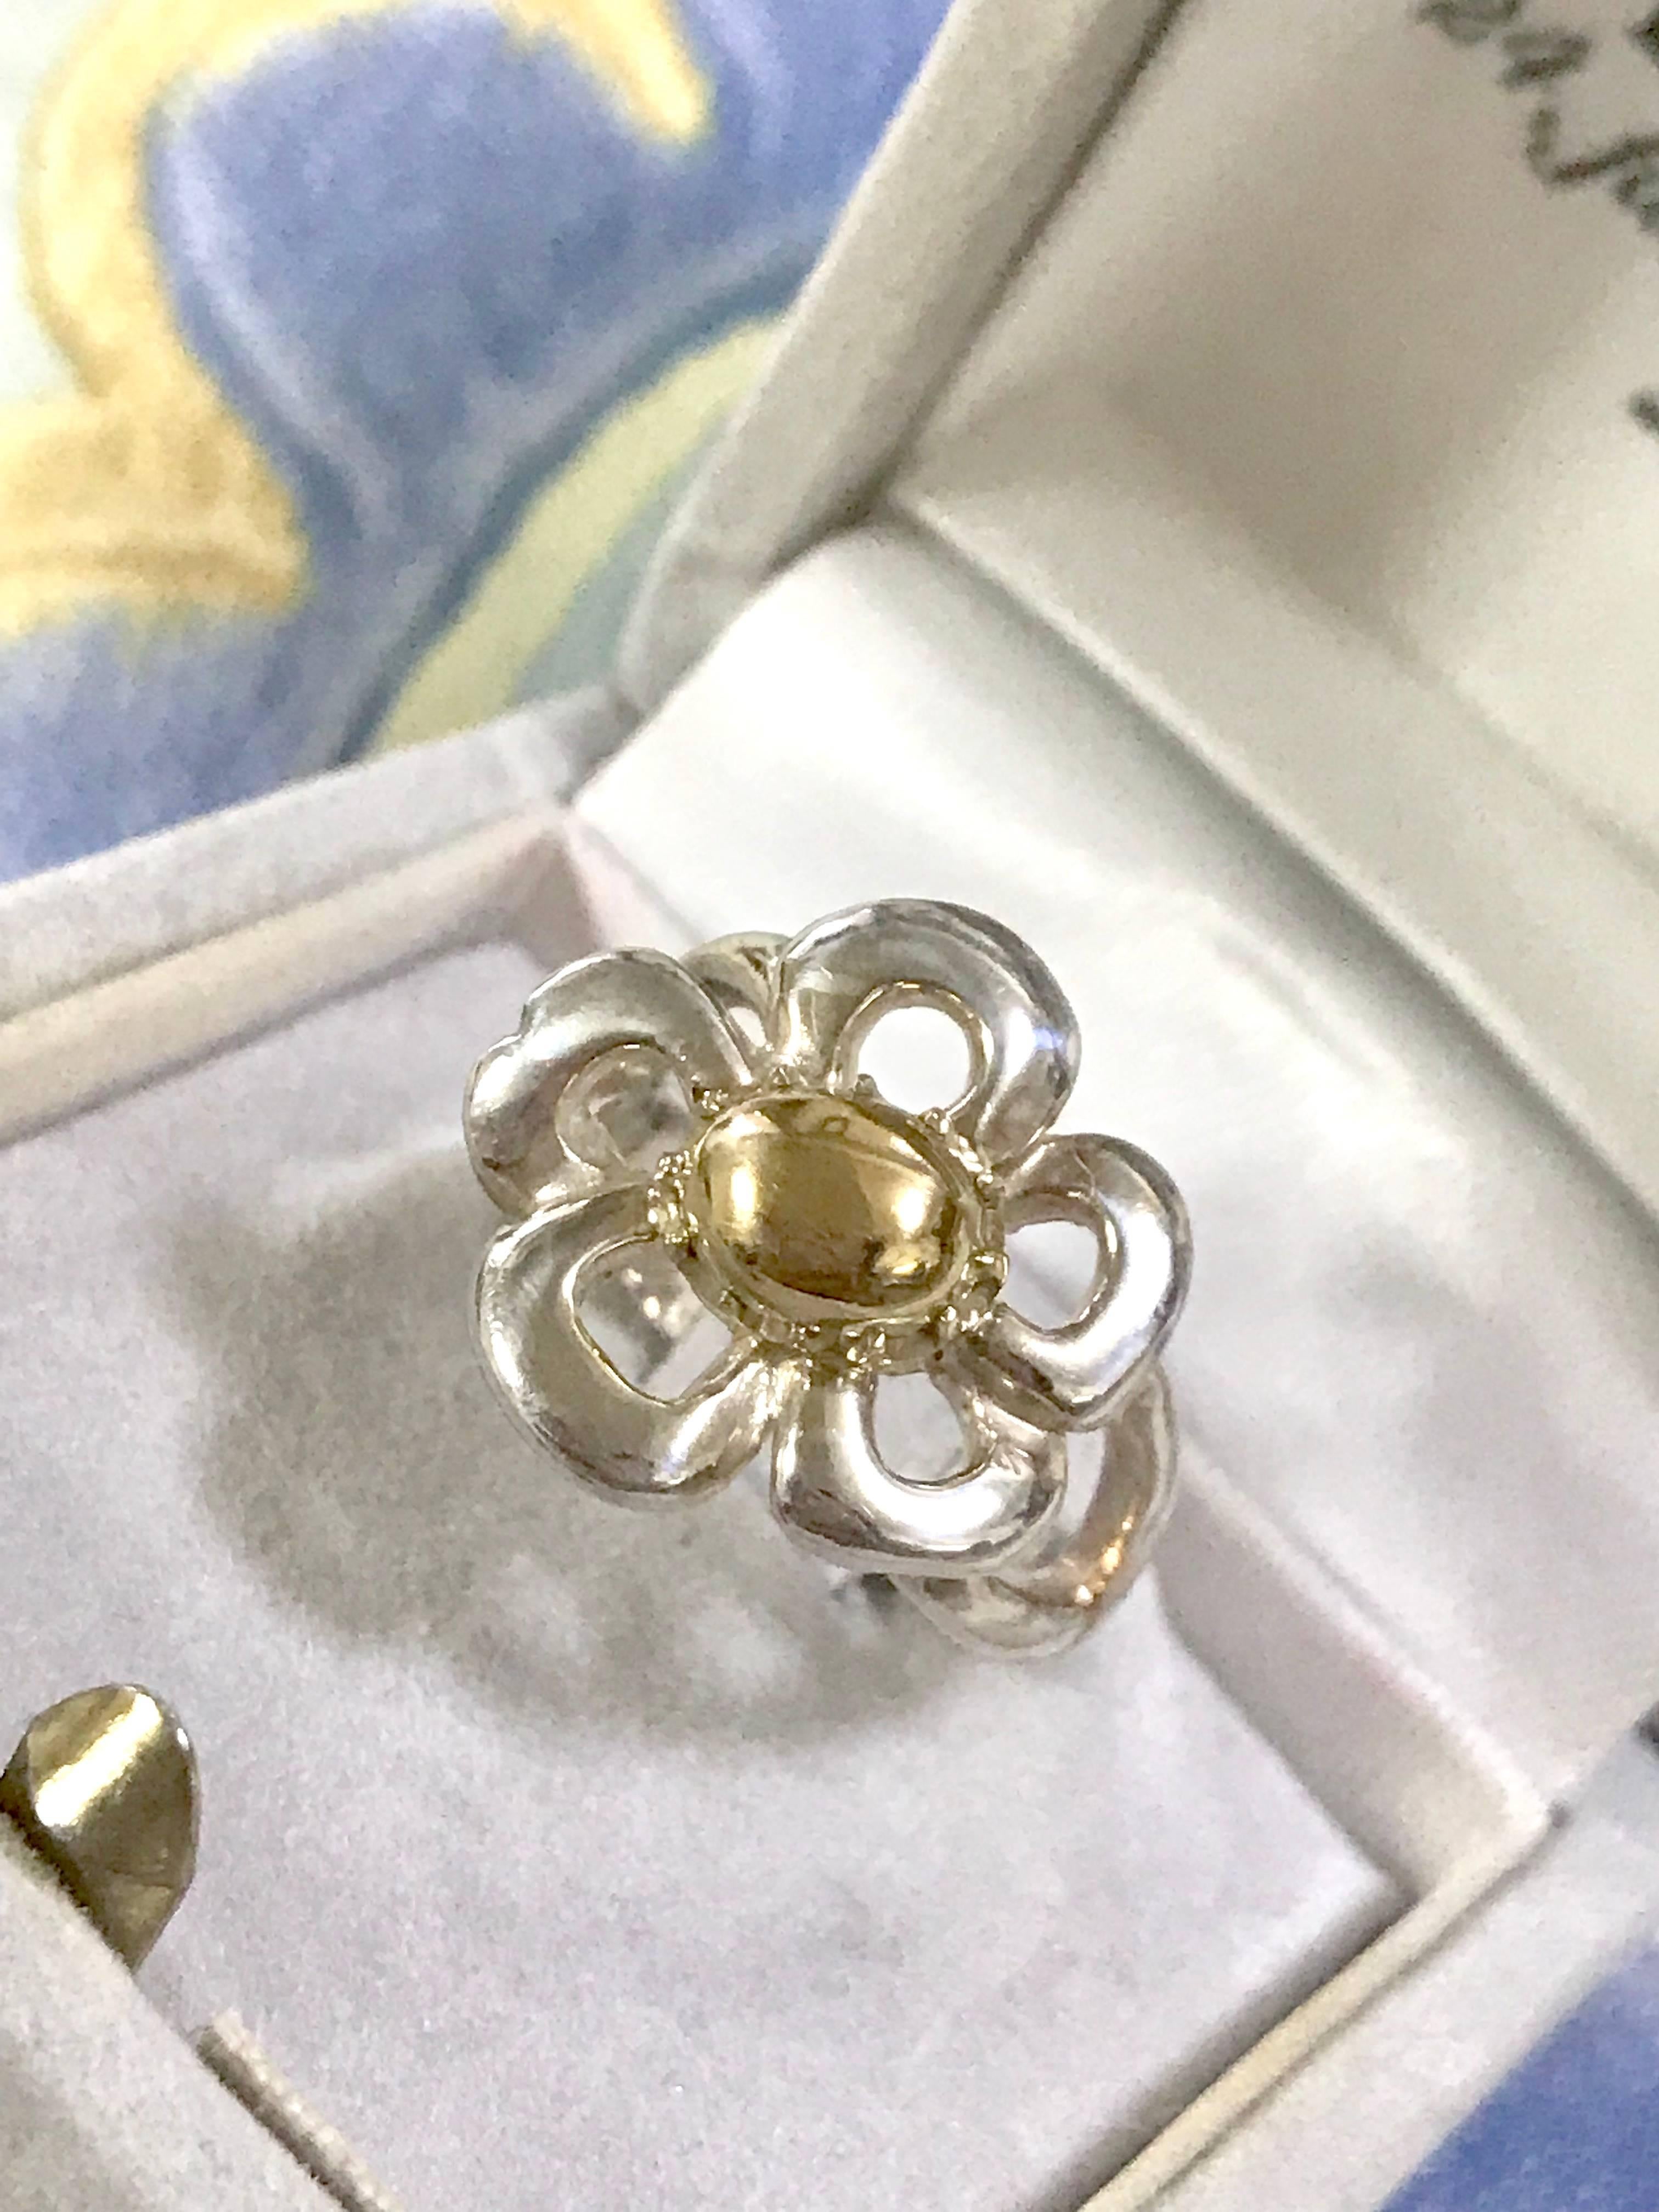 1990s. Vintage Hermes genuine 925 silver and 18k gold flower combination design ring. With original case. Size US5-6, UK K-L, JP 10-11.
Stamped size: 52: The actual size is about Japanese size 10.5, so US size is about US5-6, UK K-L

Introducing